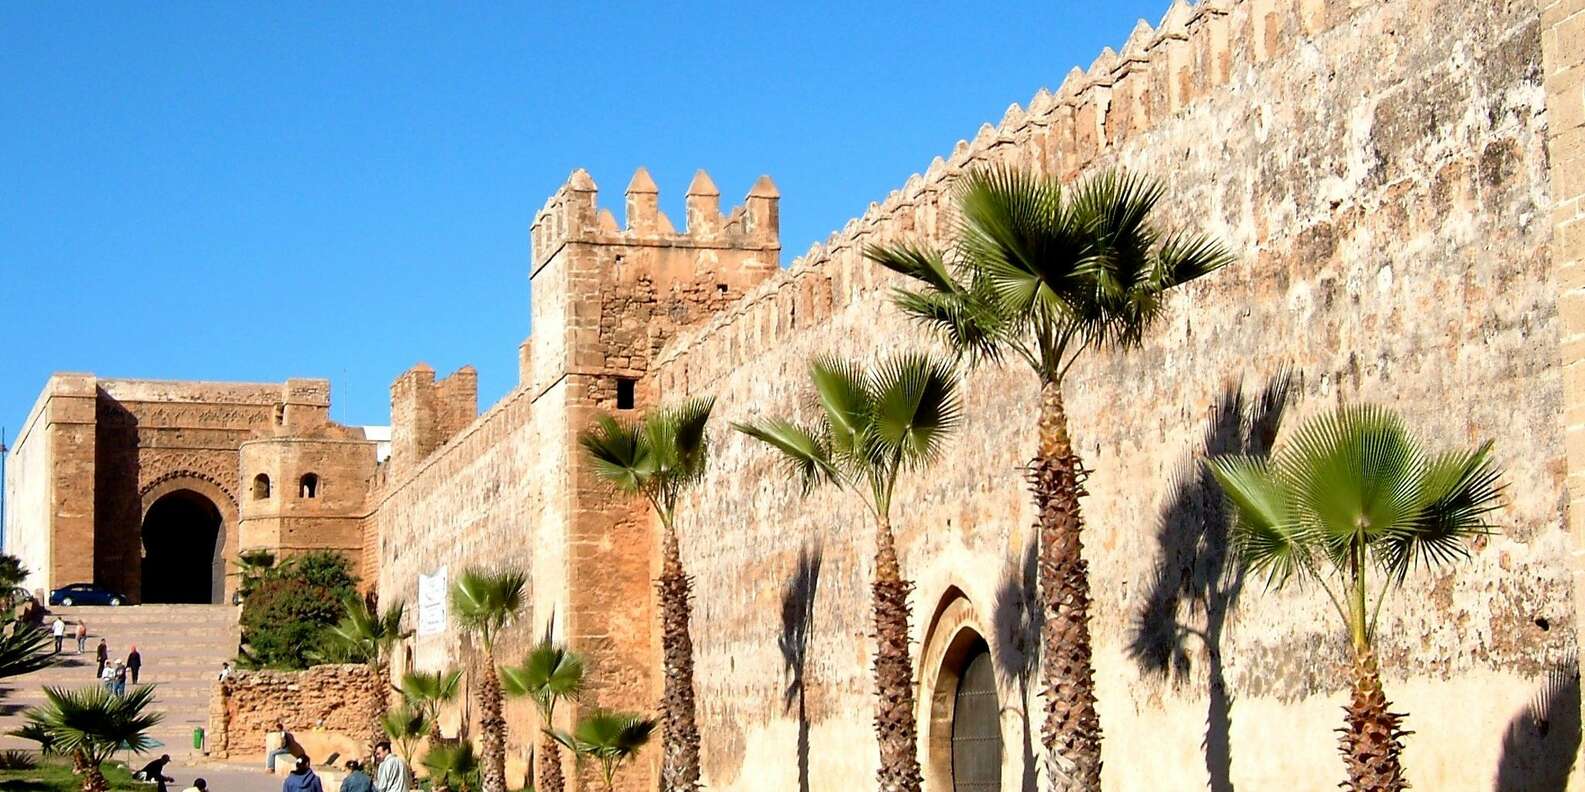 best things to do in Rabat